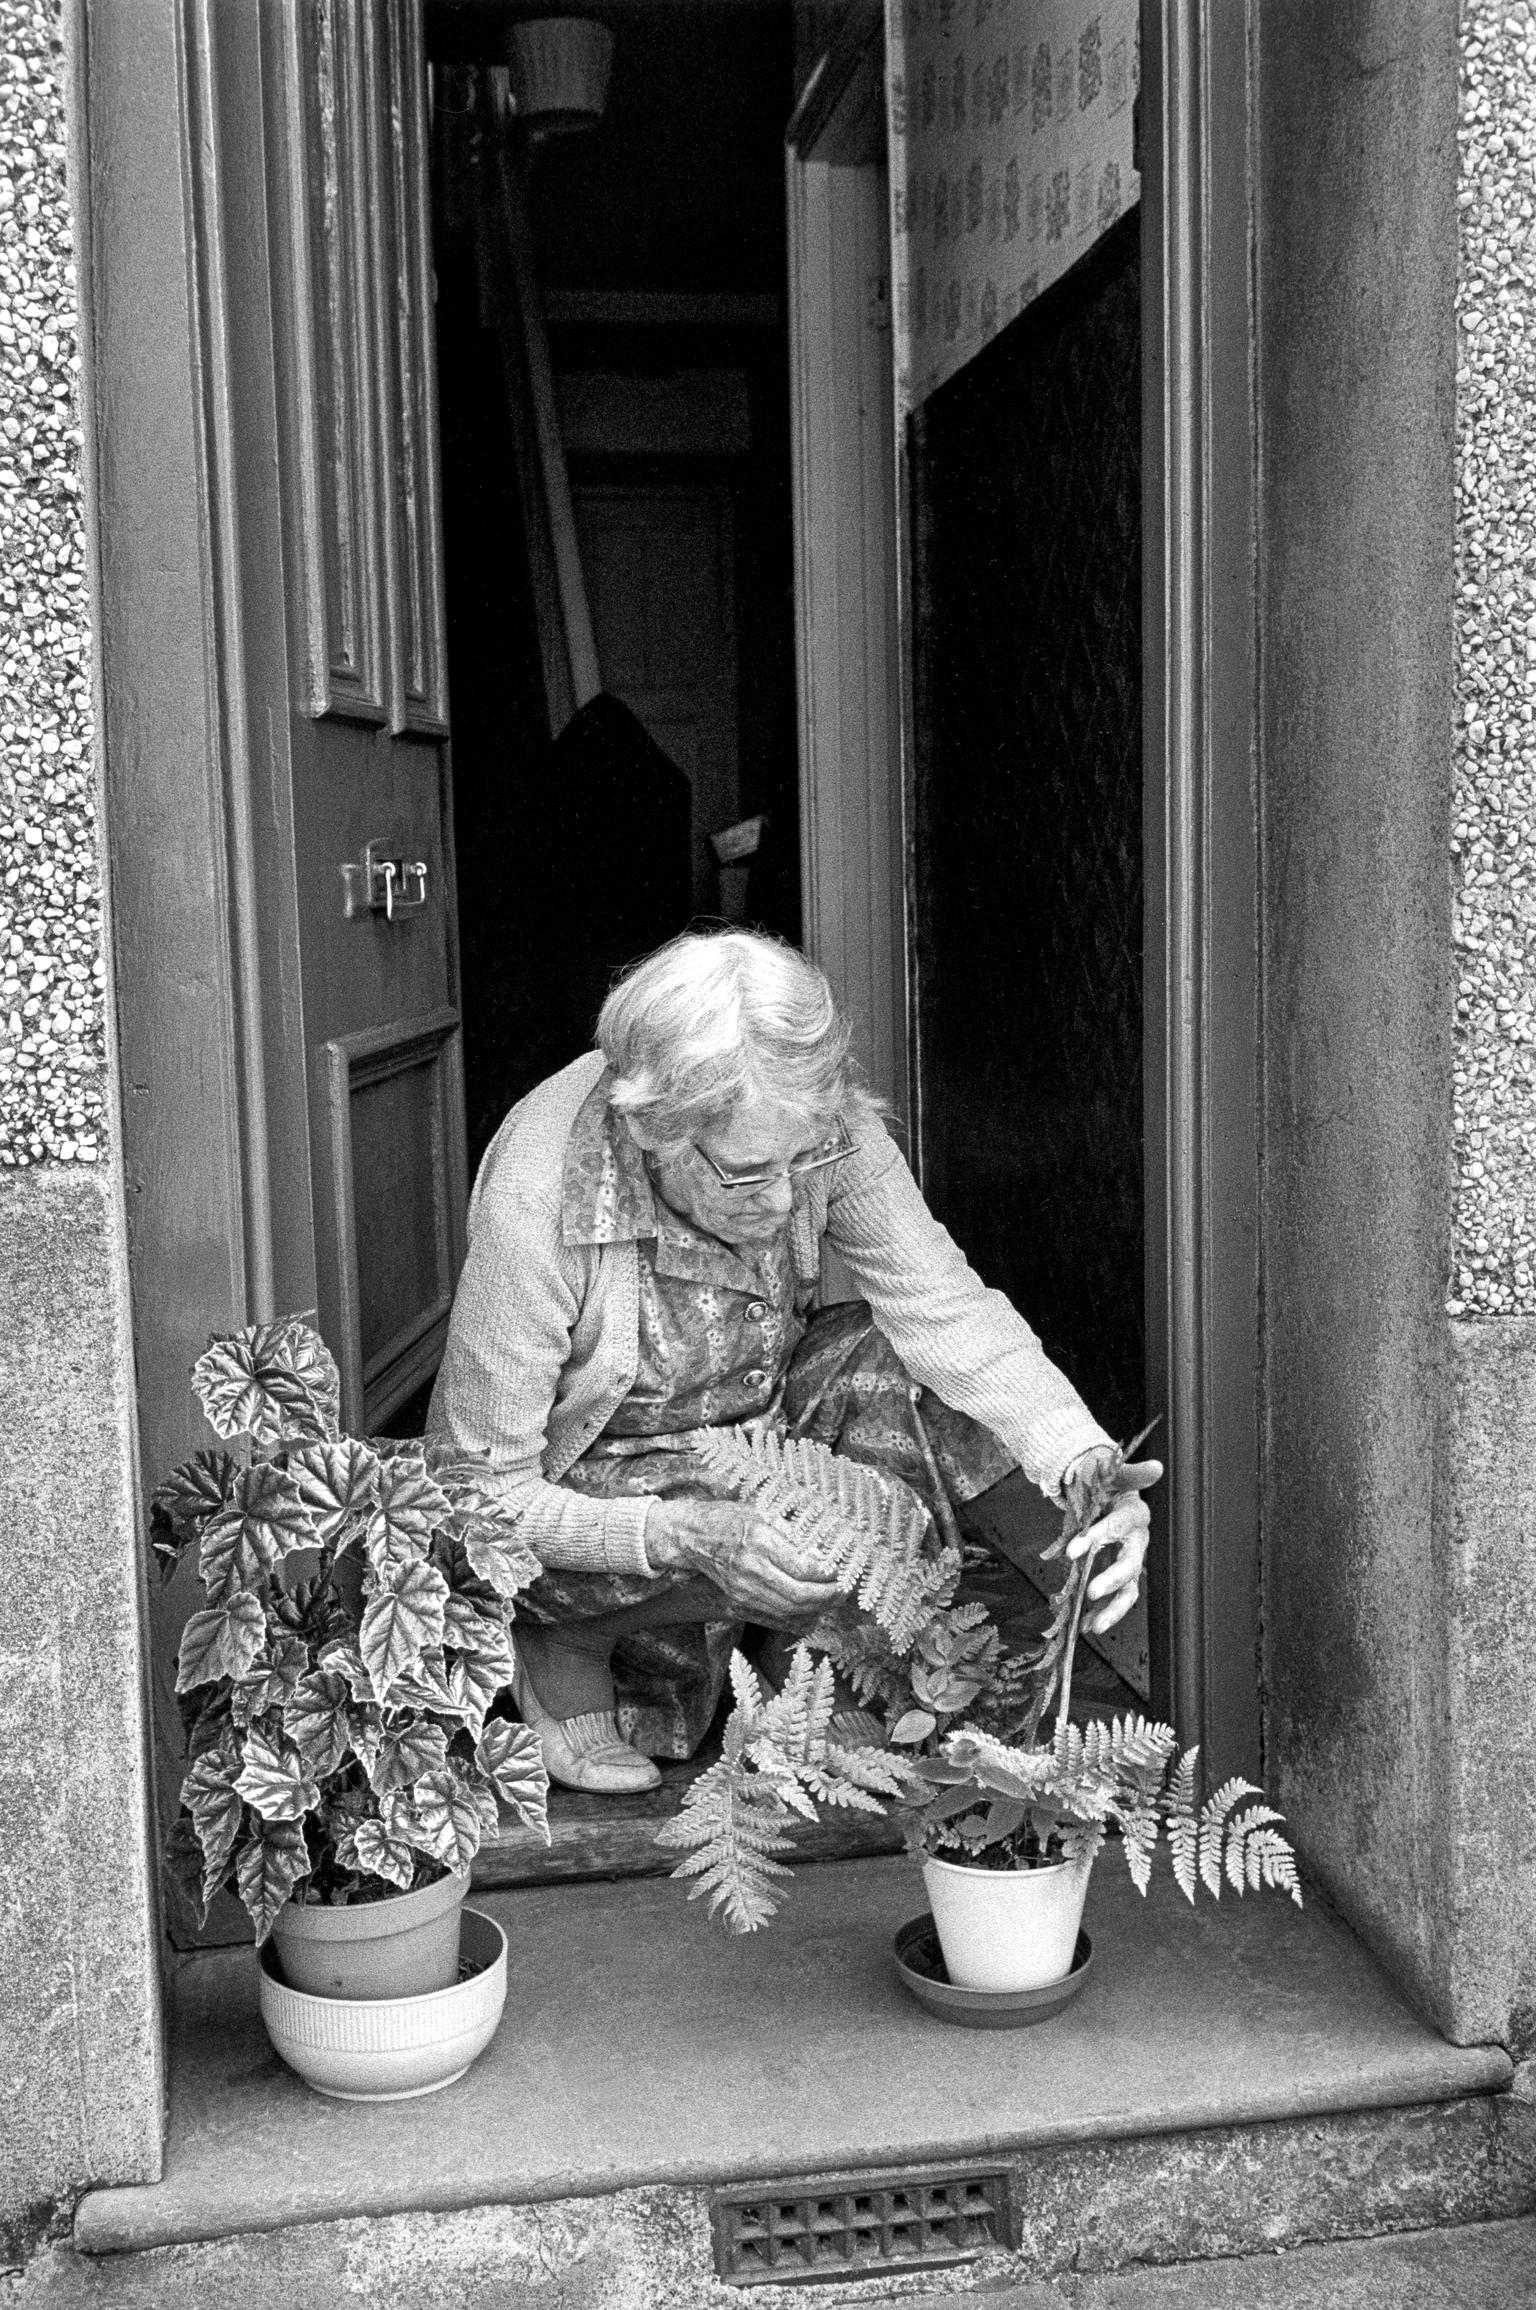 Attending house plants on the front step. Porthmadog, Wales